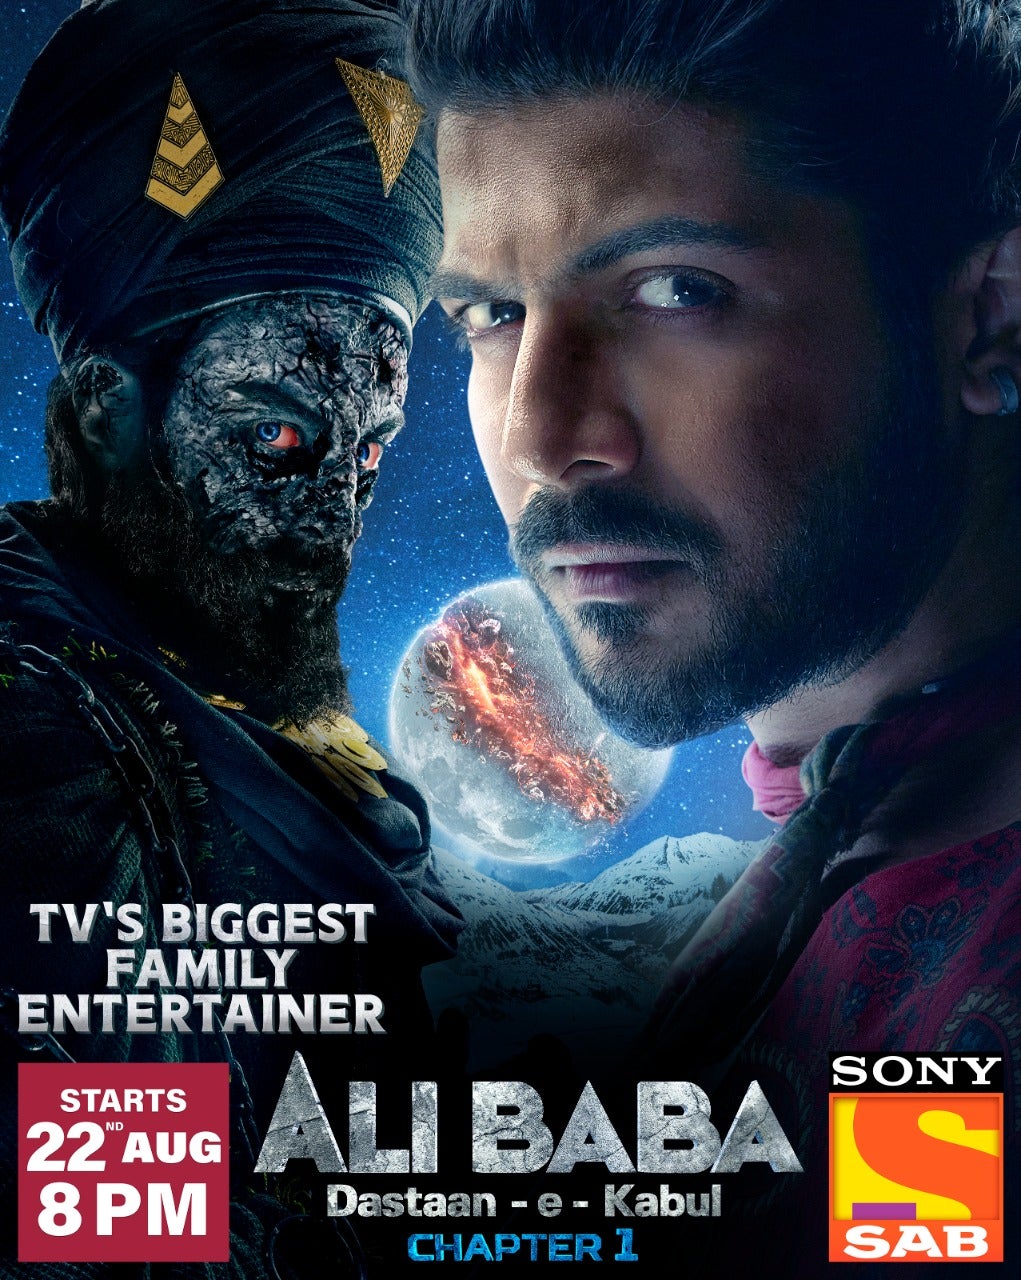 TV ratings for Alibaba: Dastaan-E-Kabul in Colombia. Sony SAB TV series